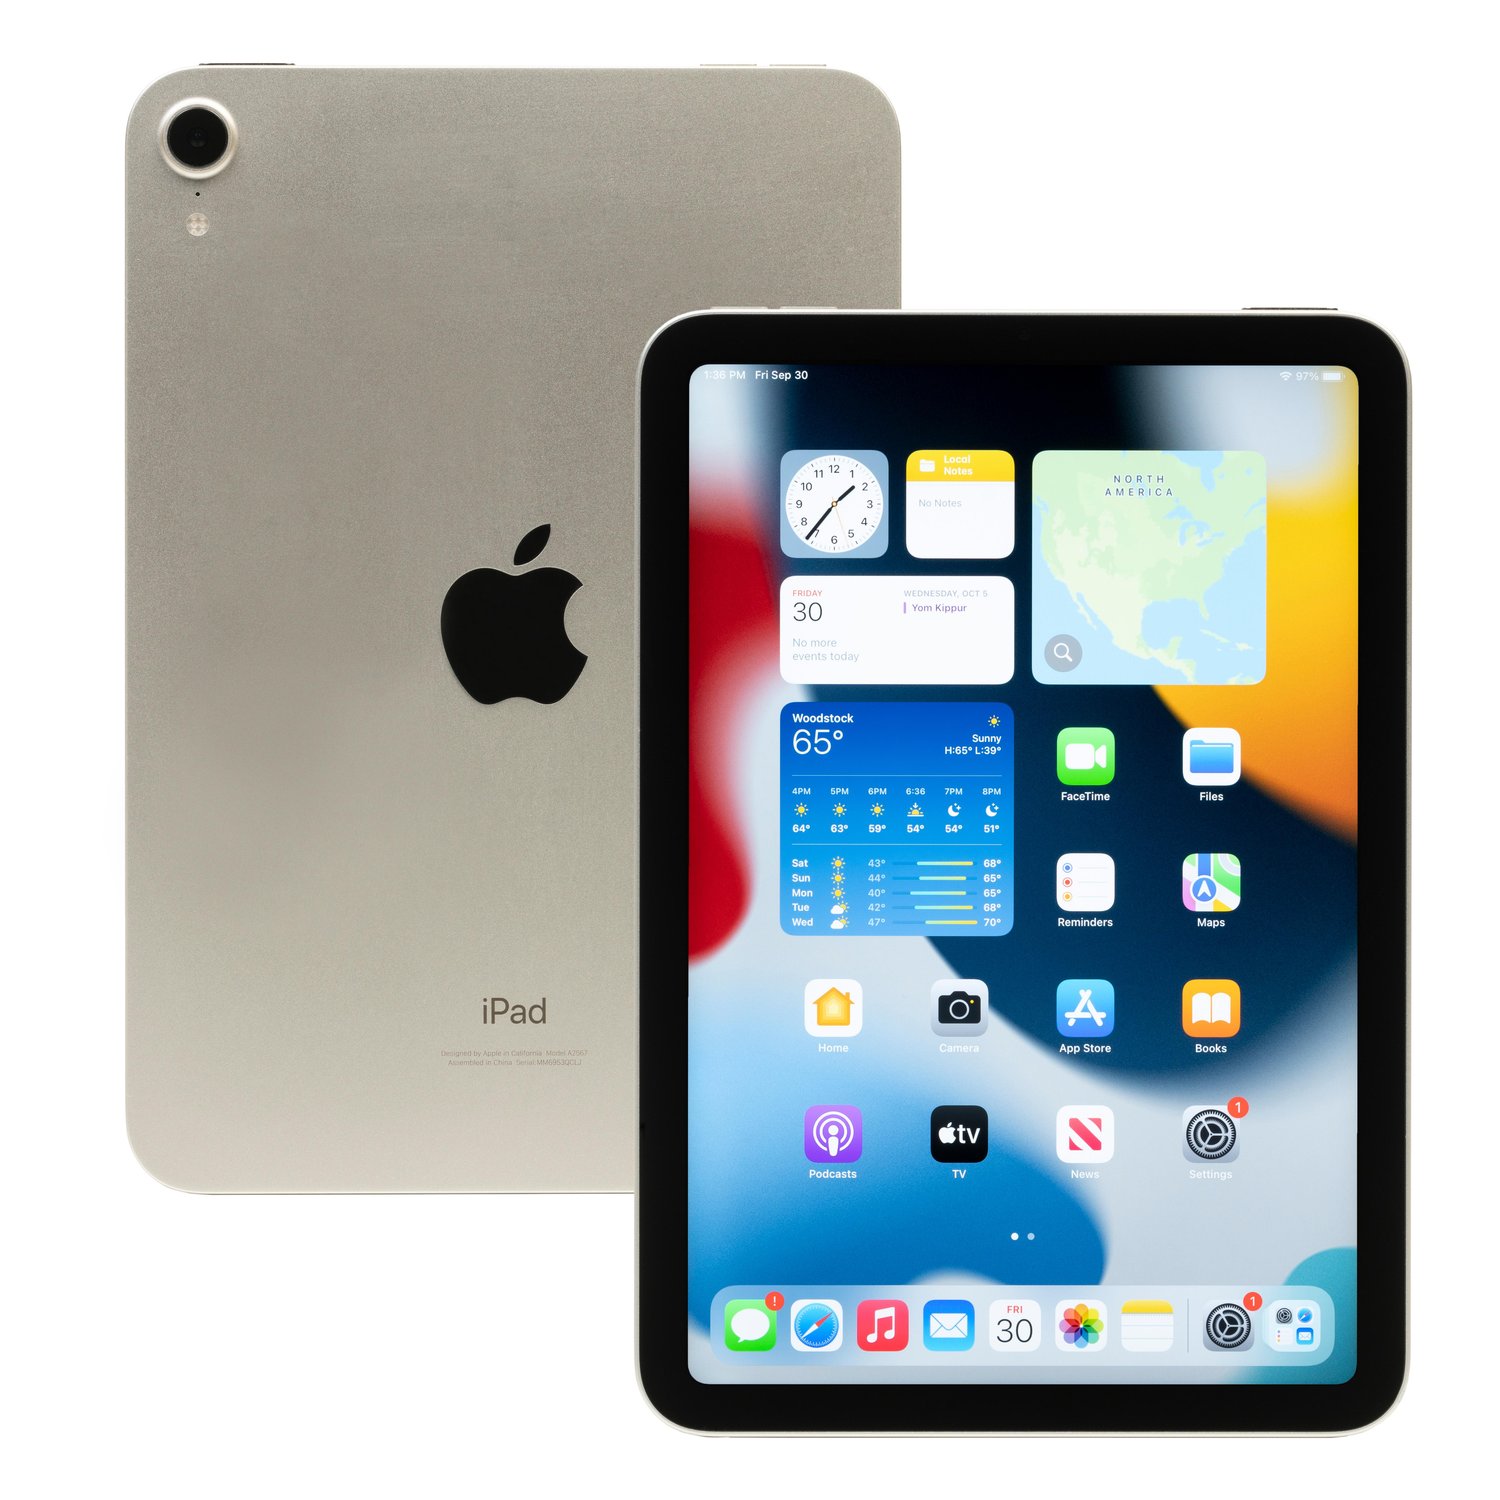 Configure your own Apple iPad at OWC